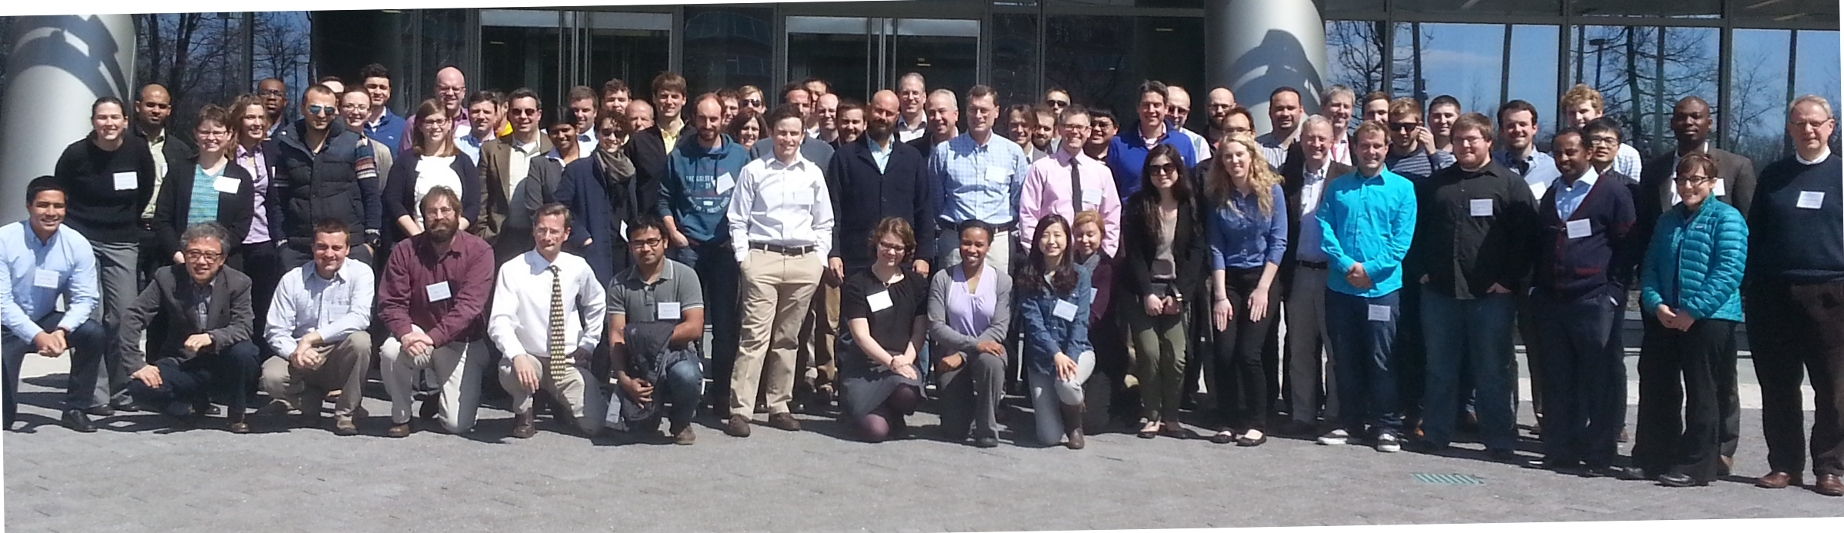 ADCIRC Users Group Meeting Group Photo 2015